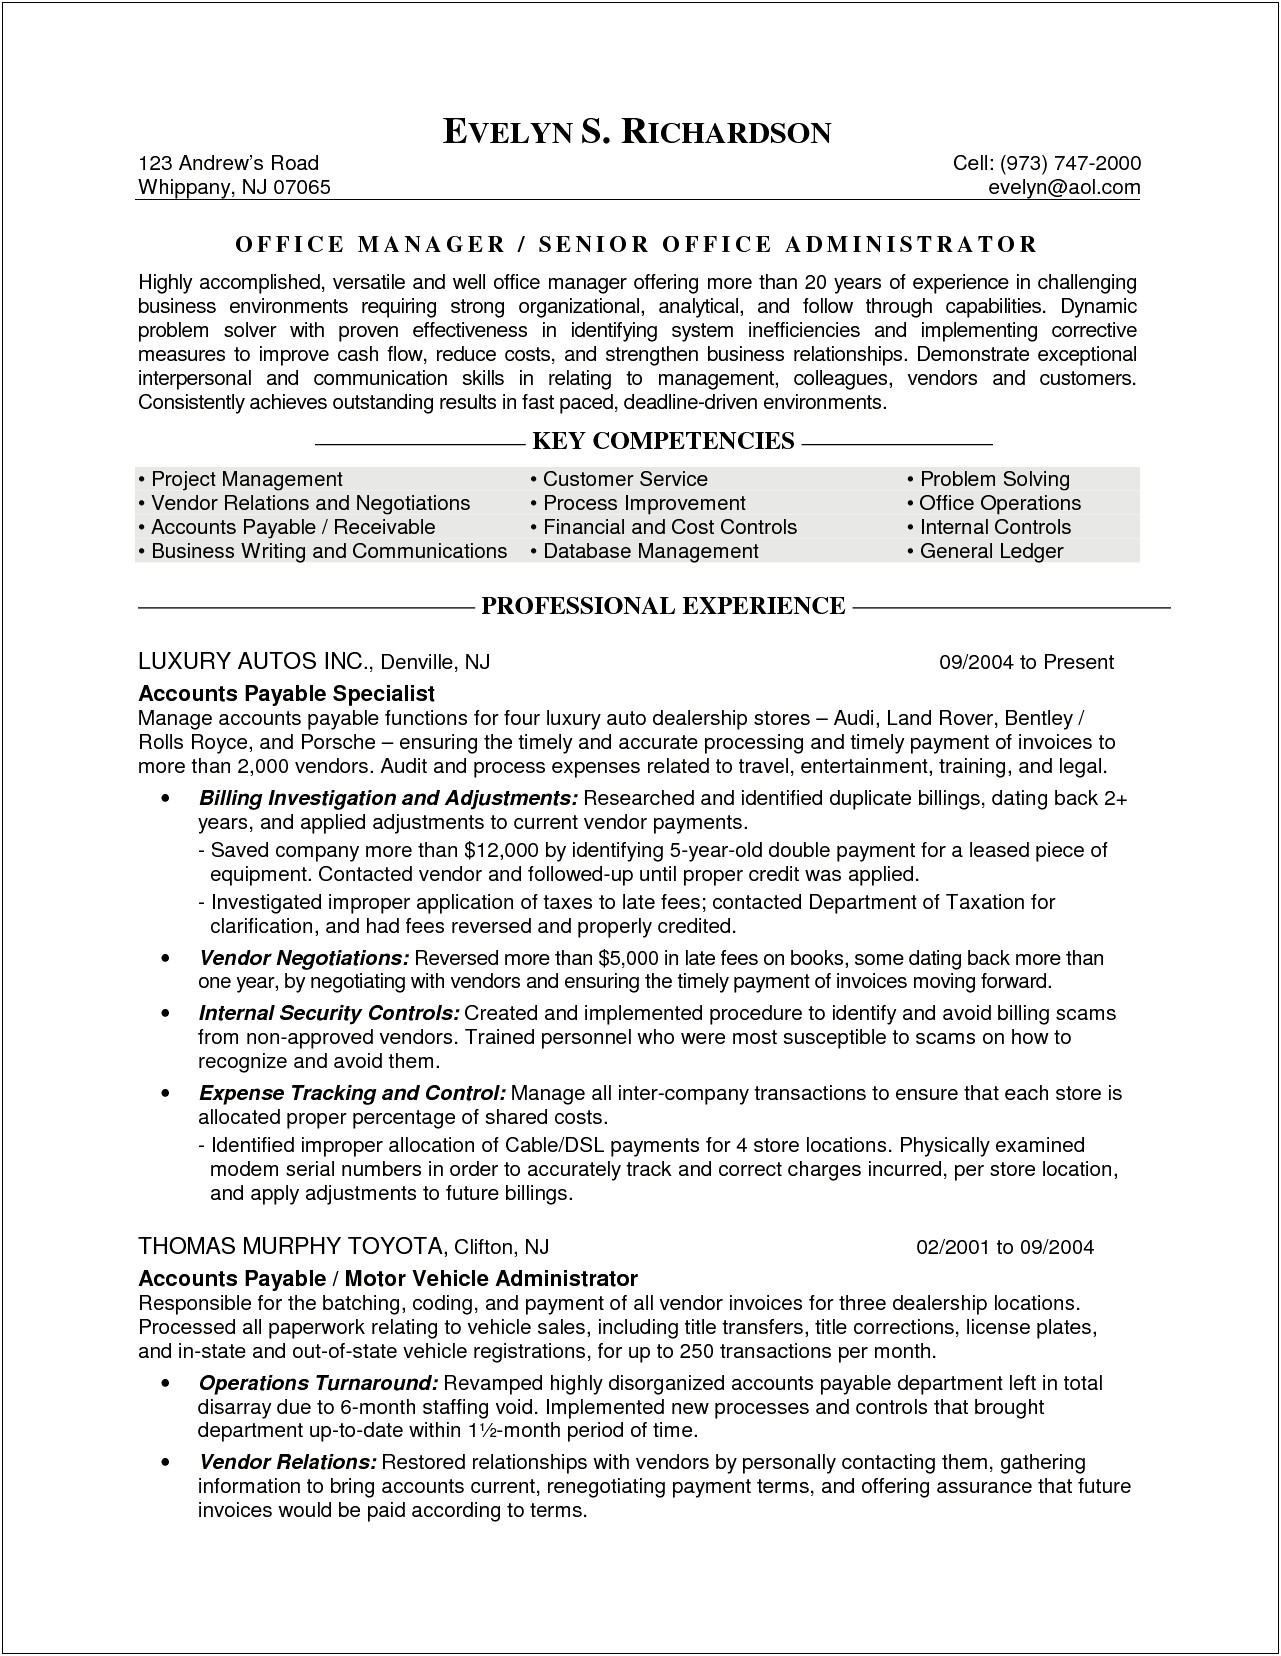 Resume For Office Manager Objective